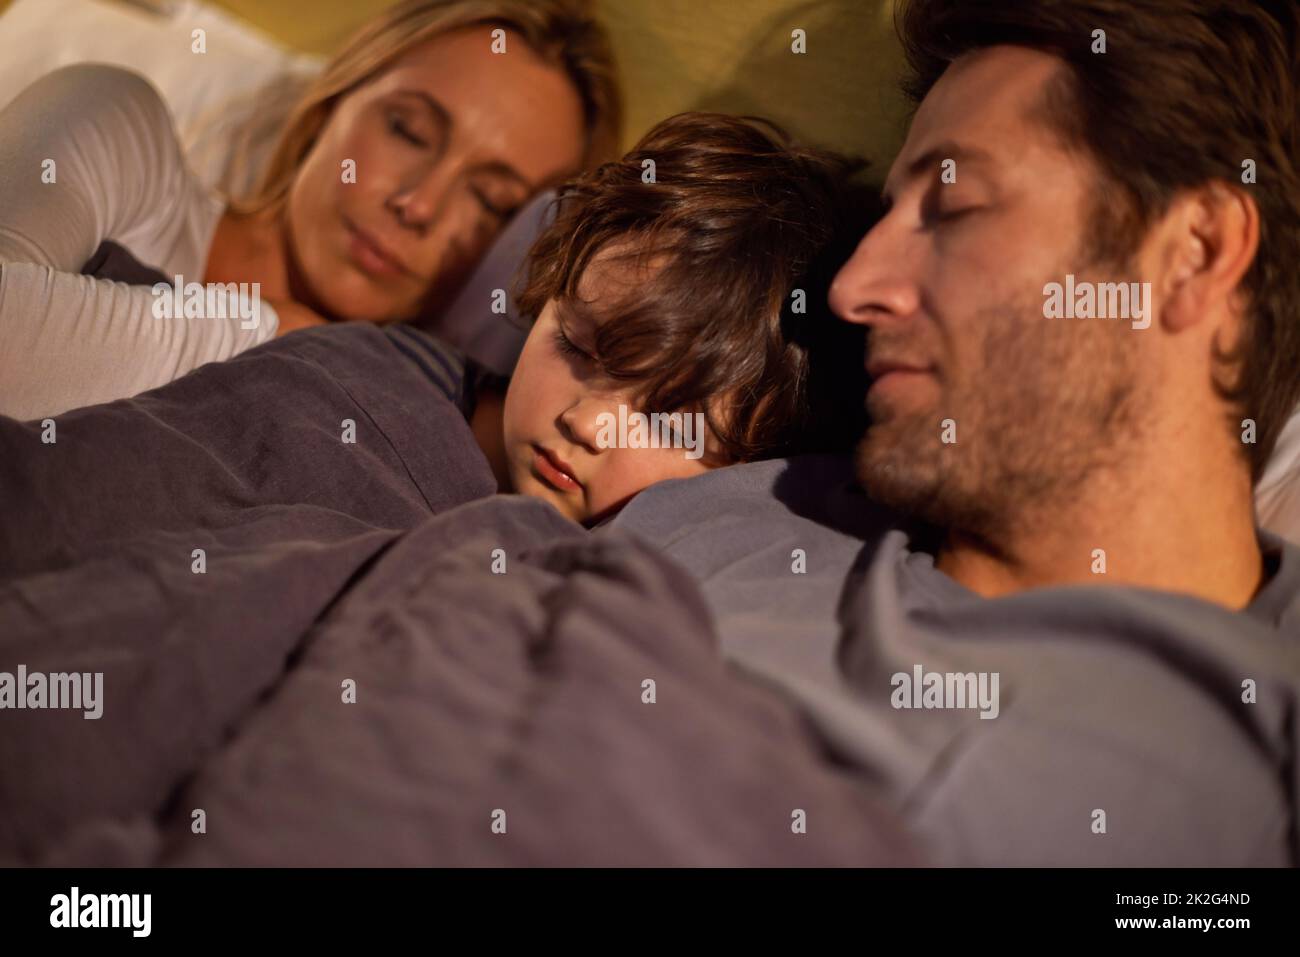 Off to dreamland together. Shot of a young family sleeping beside each other. Stock Photo